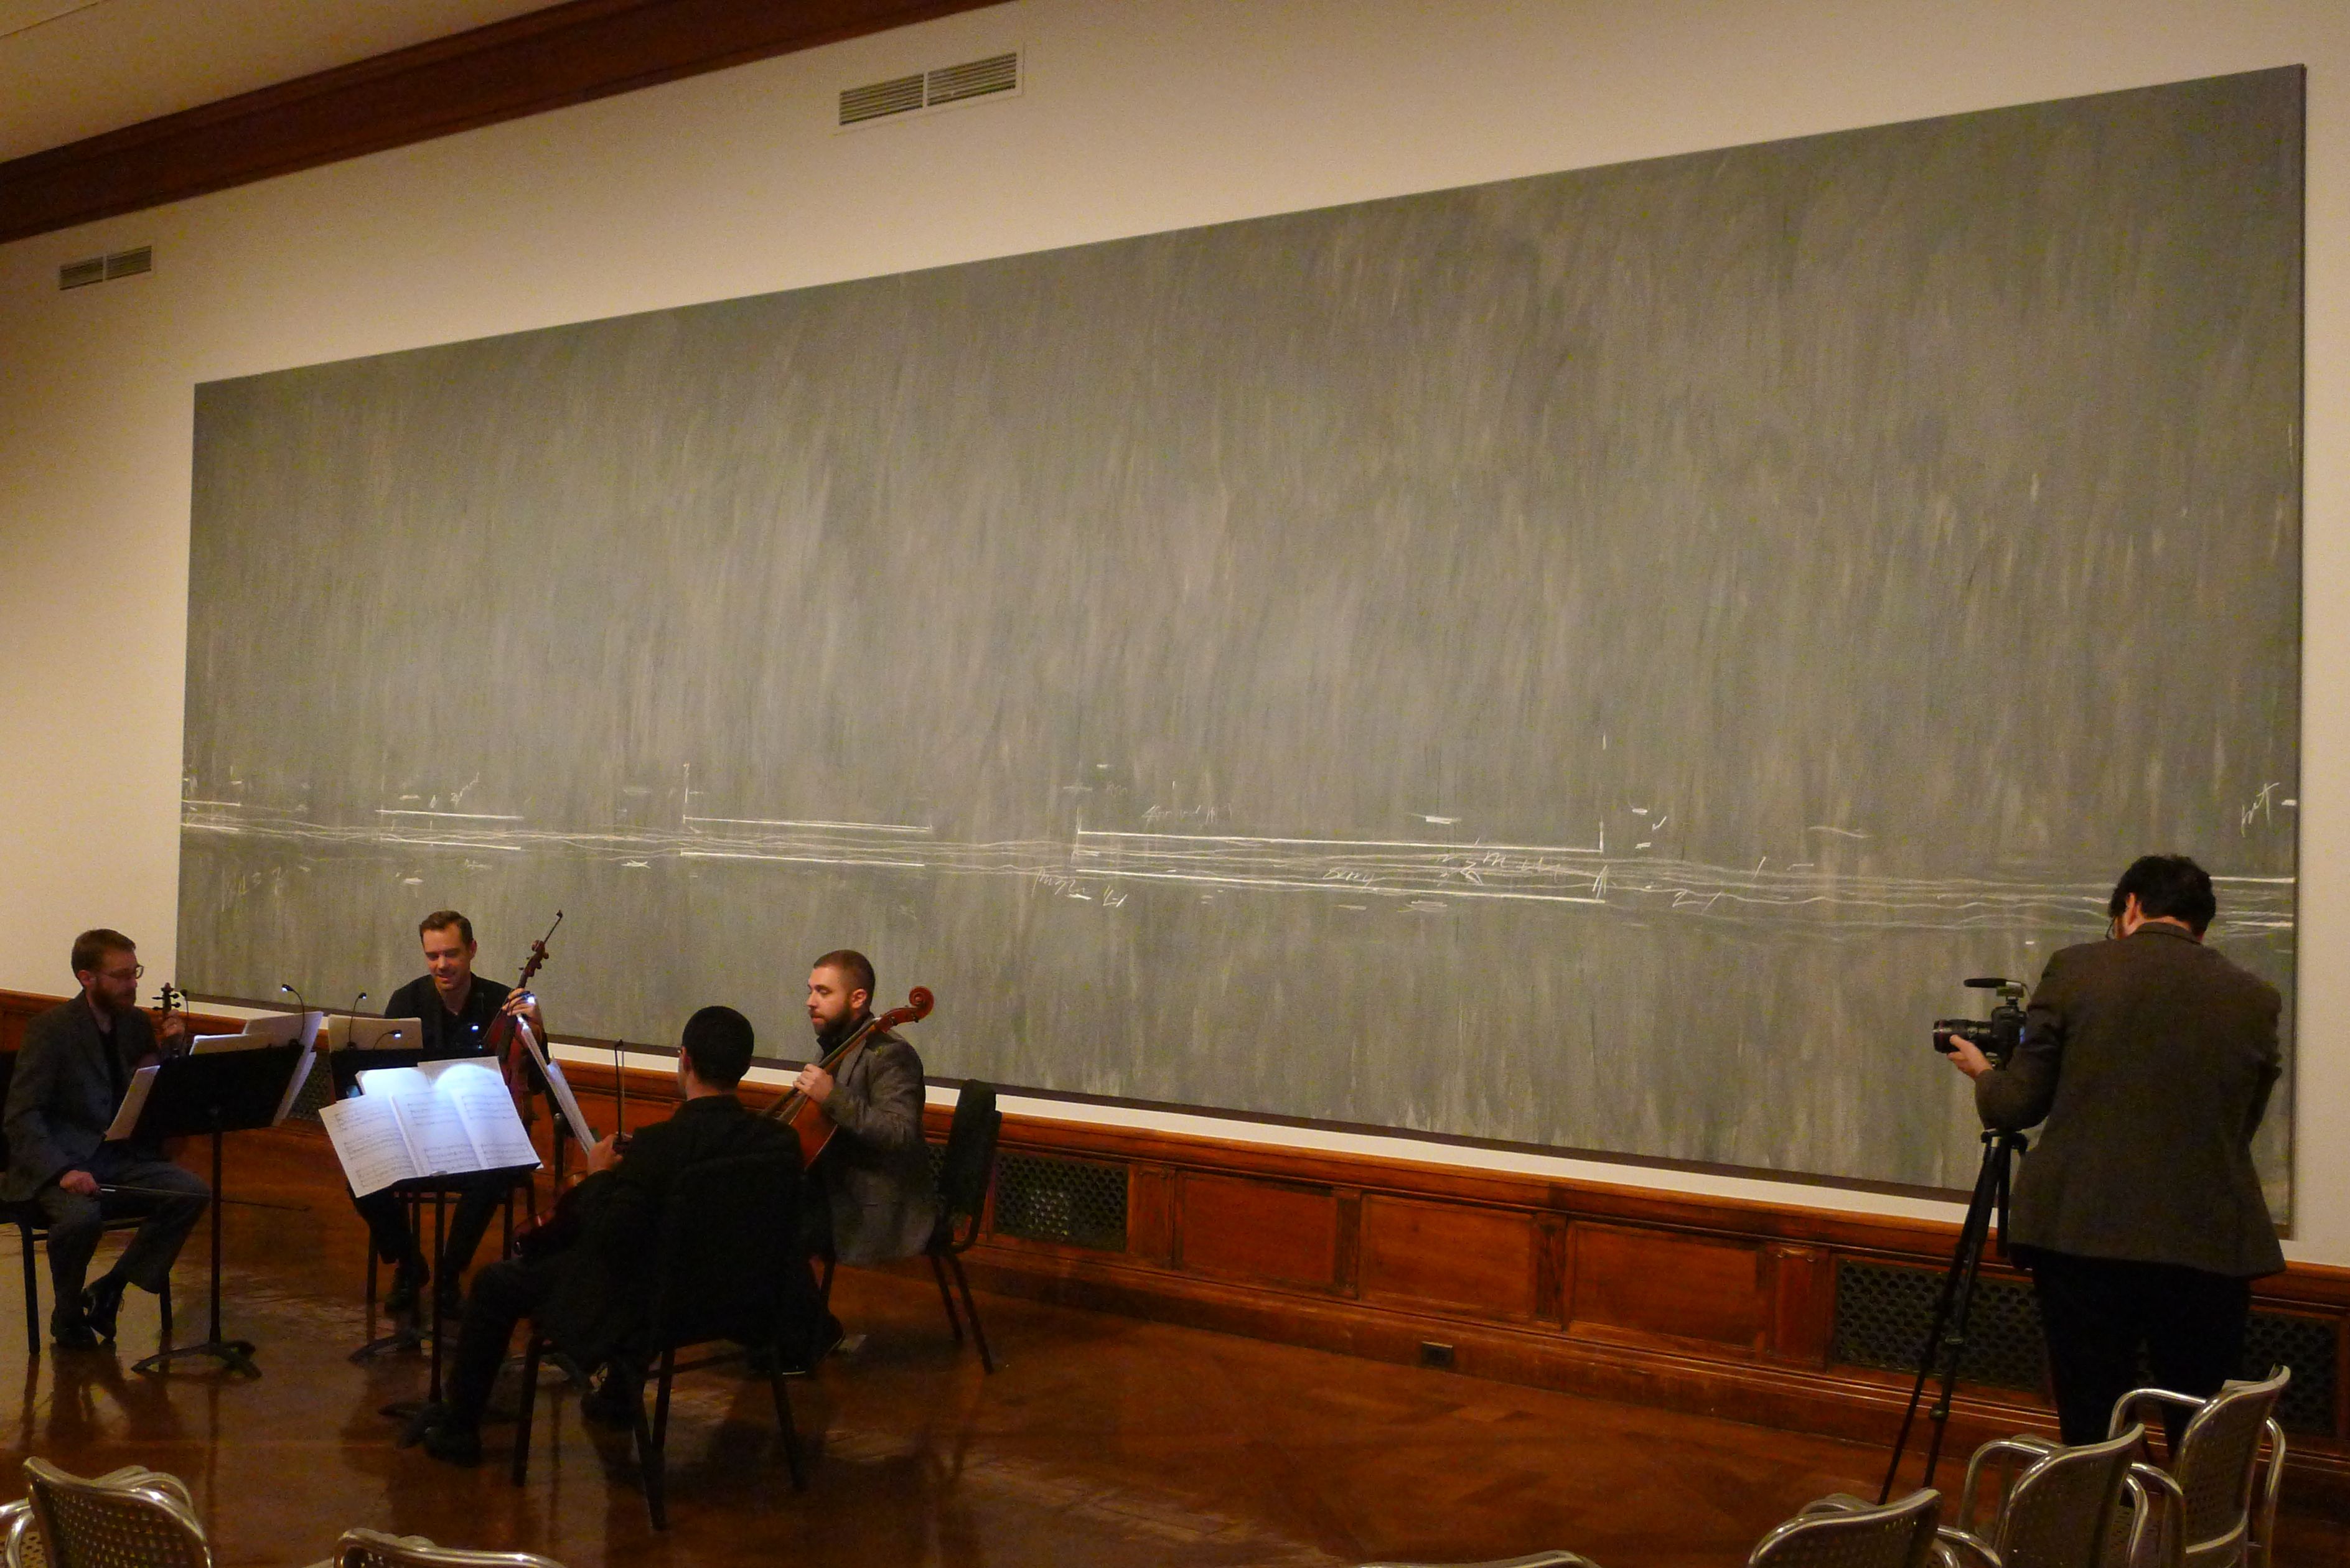 The JACK rehearsing in front of Twombly.